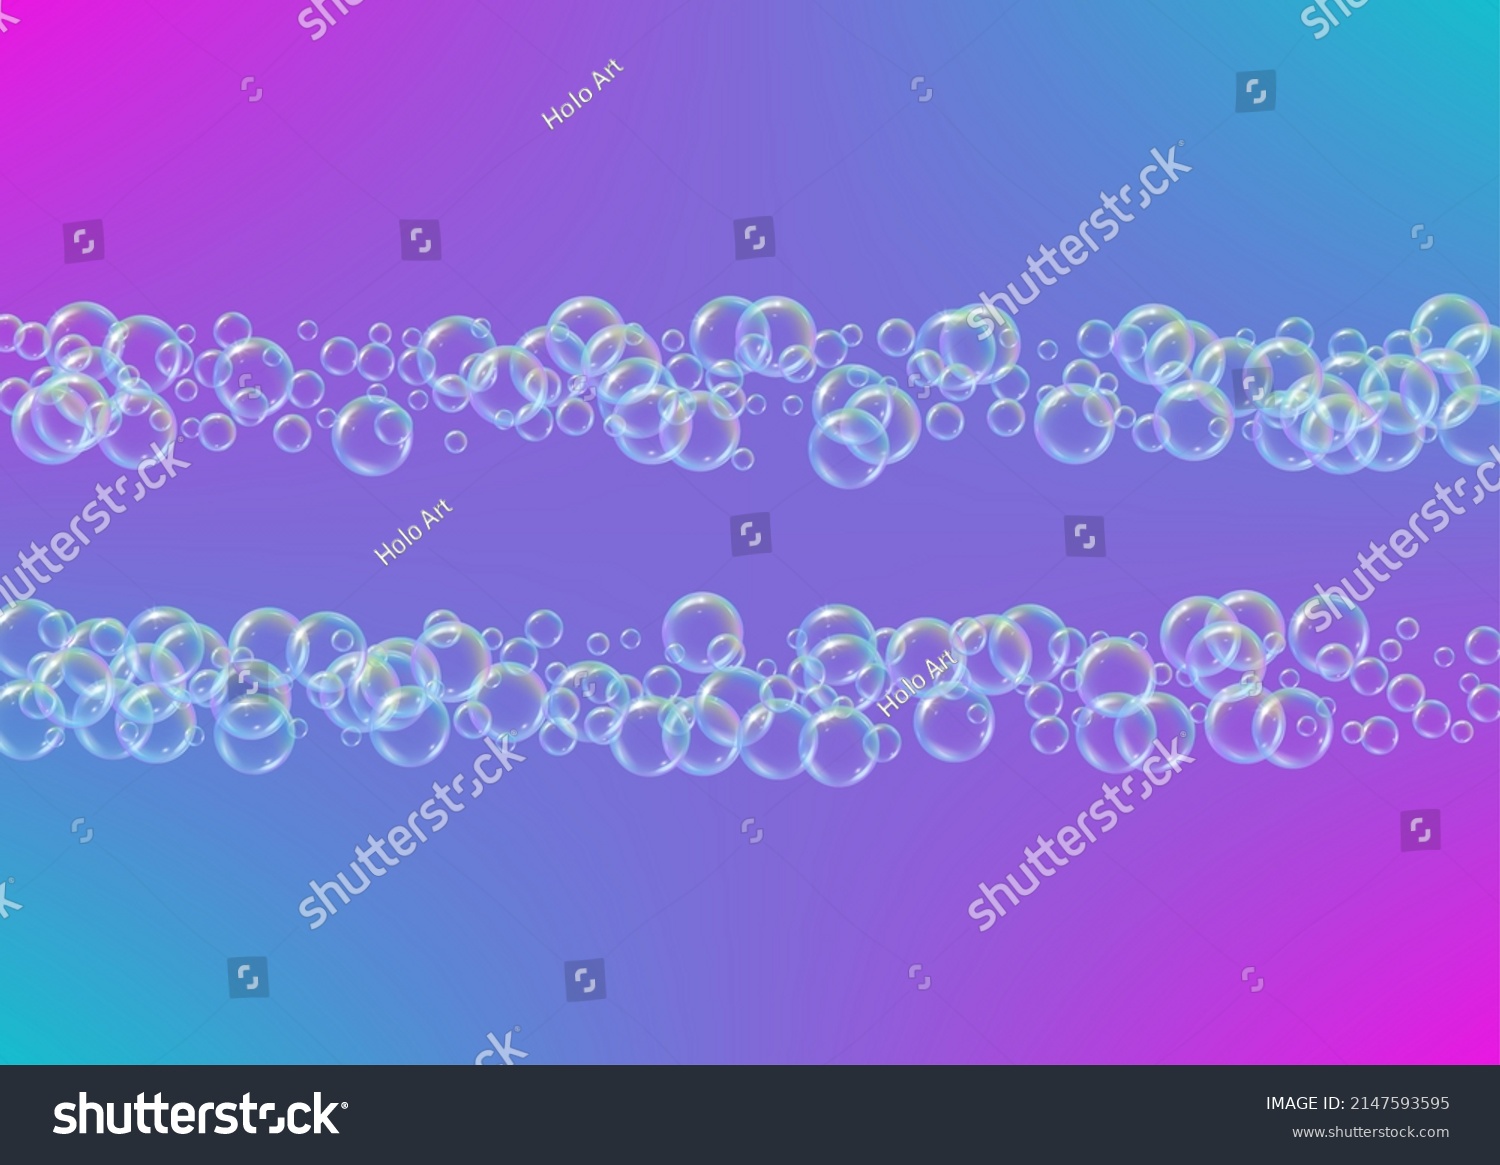 Foam party background with shampoo and soap suds bubbles. Vibrant spray and splash. Realistic water frame and border. 3d vector illustration template. Purple colorful liquid foam party. #2147593595